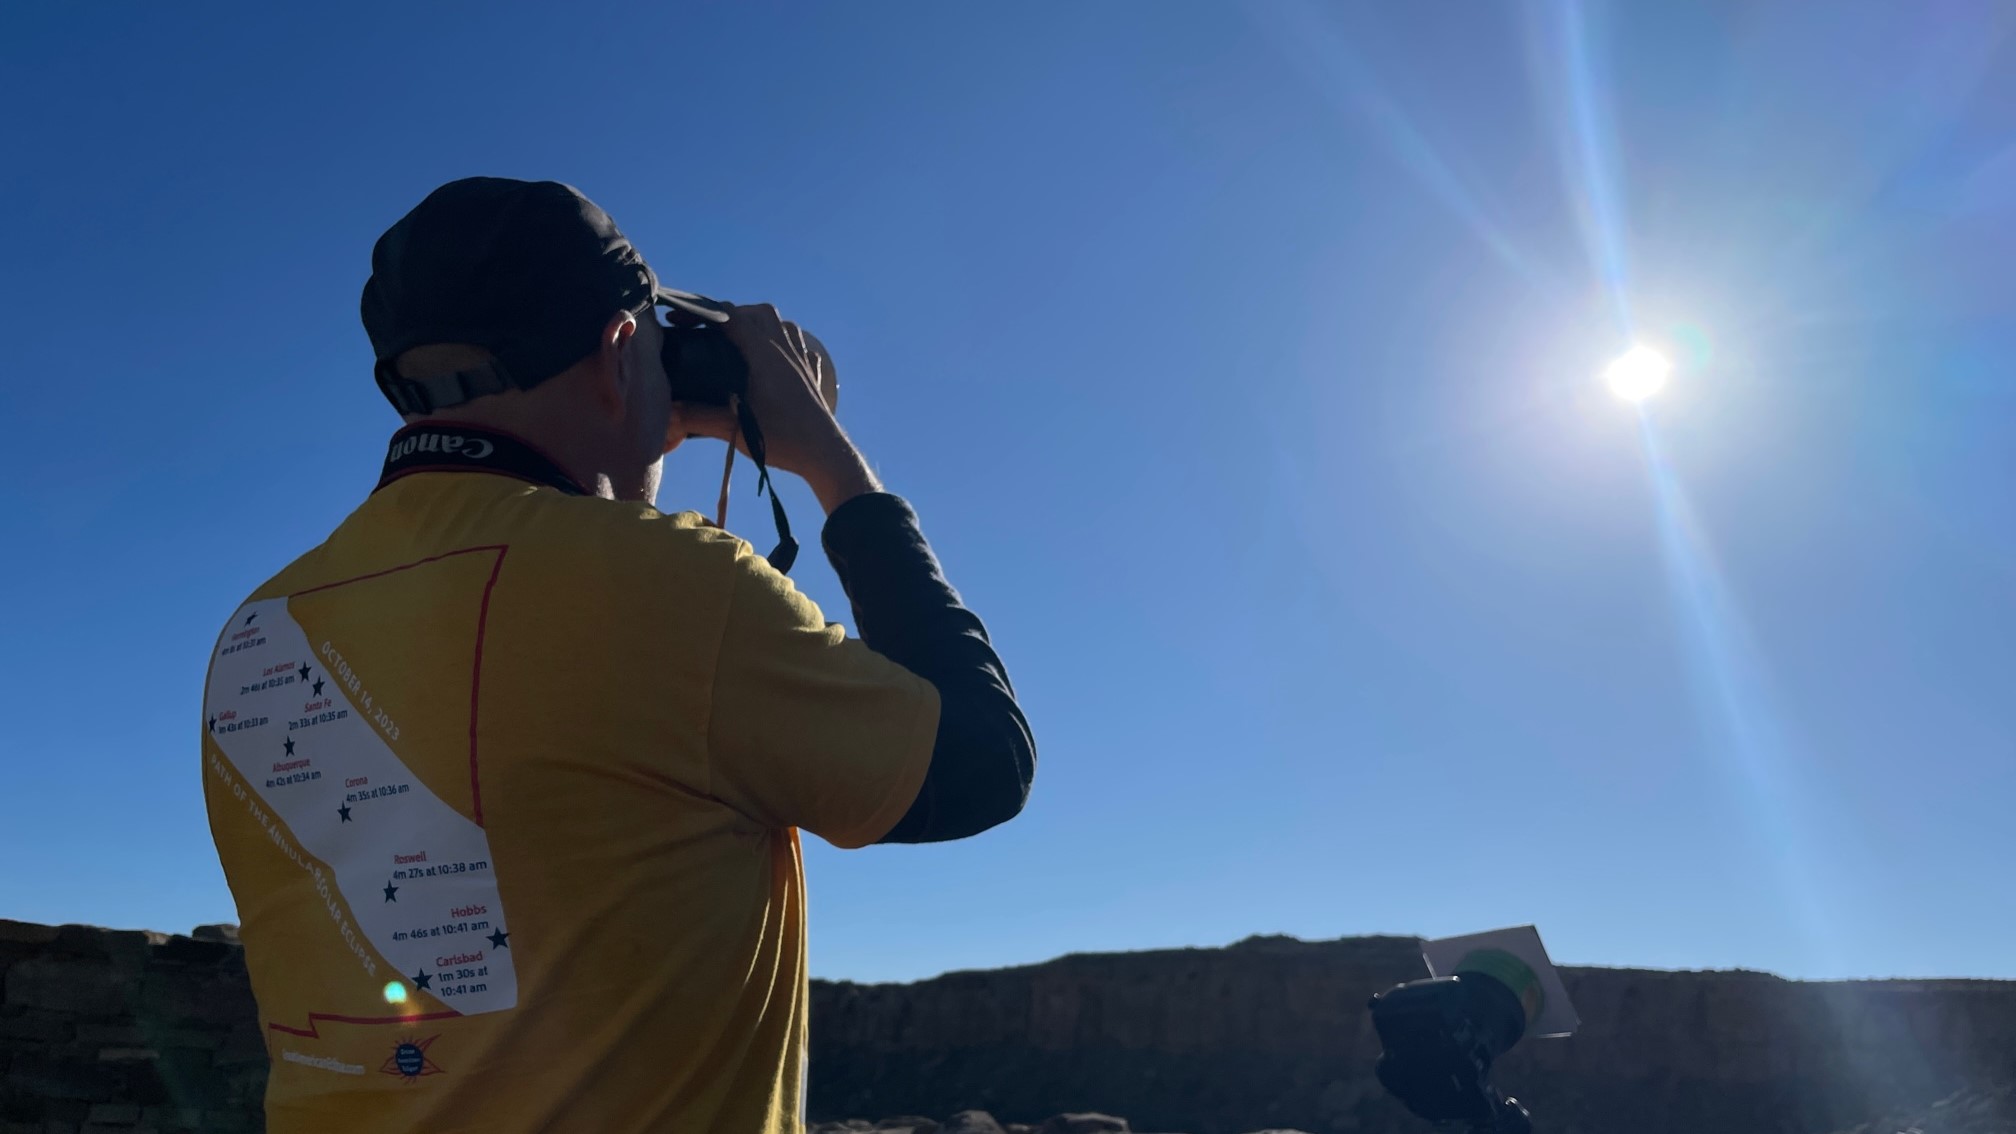 A man wearing a yellow t shirt holds a pair of binoculars and looks at the sun.